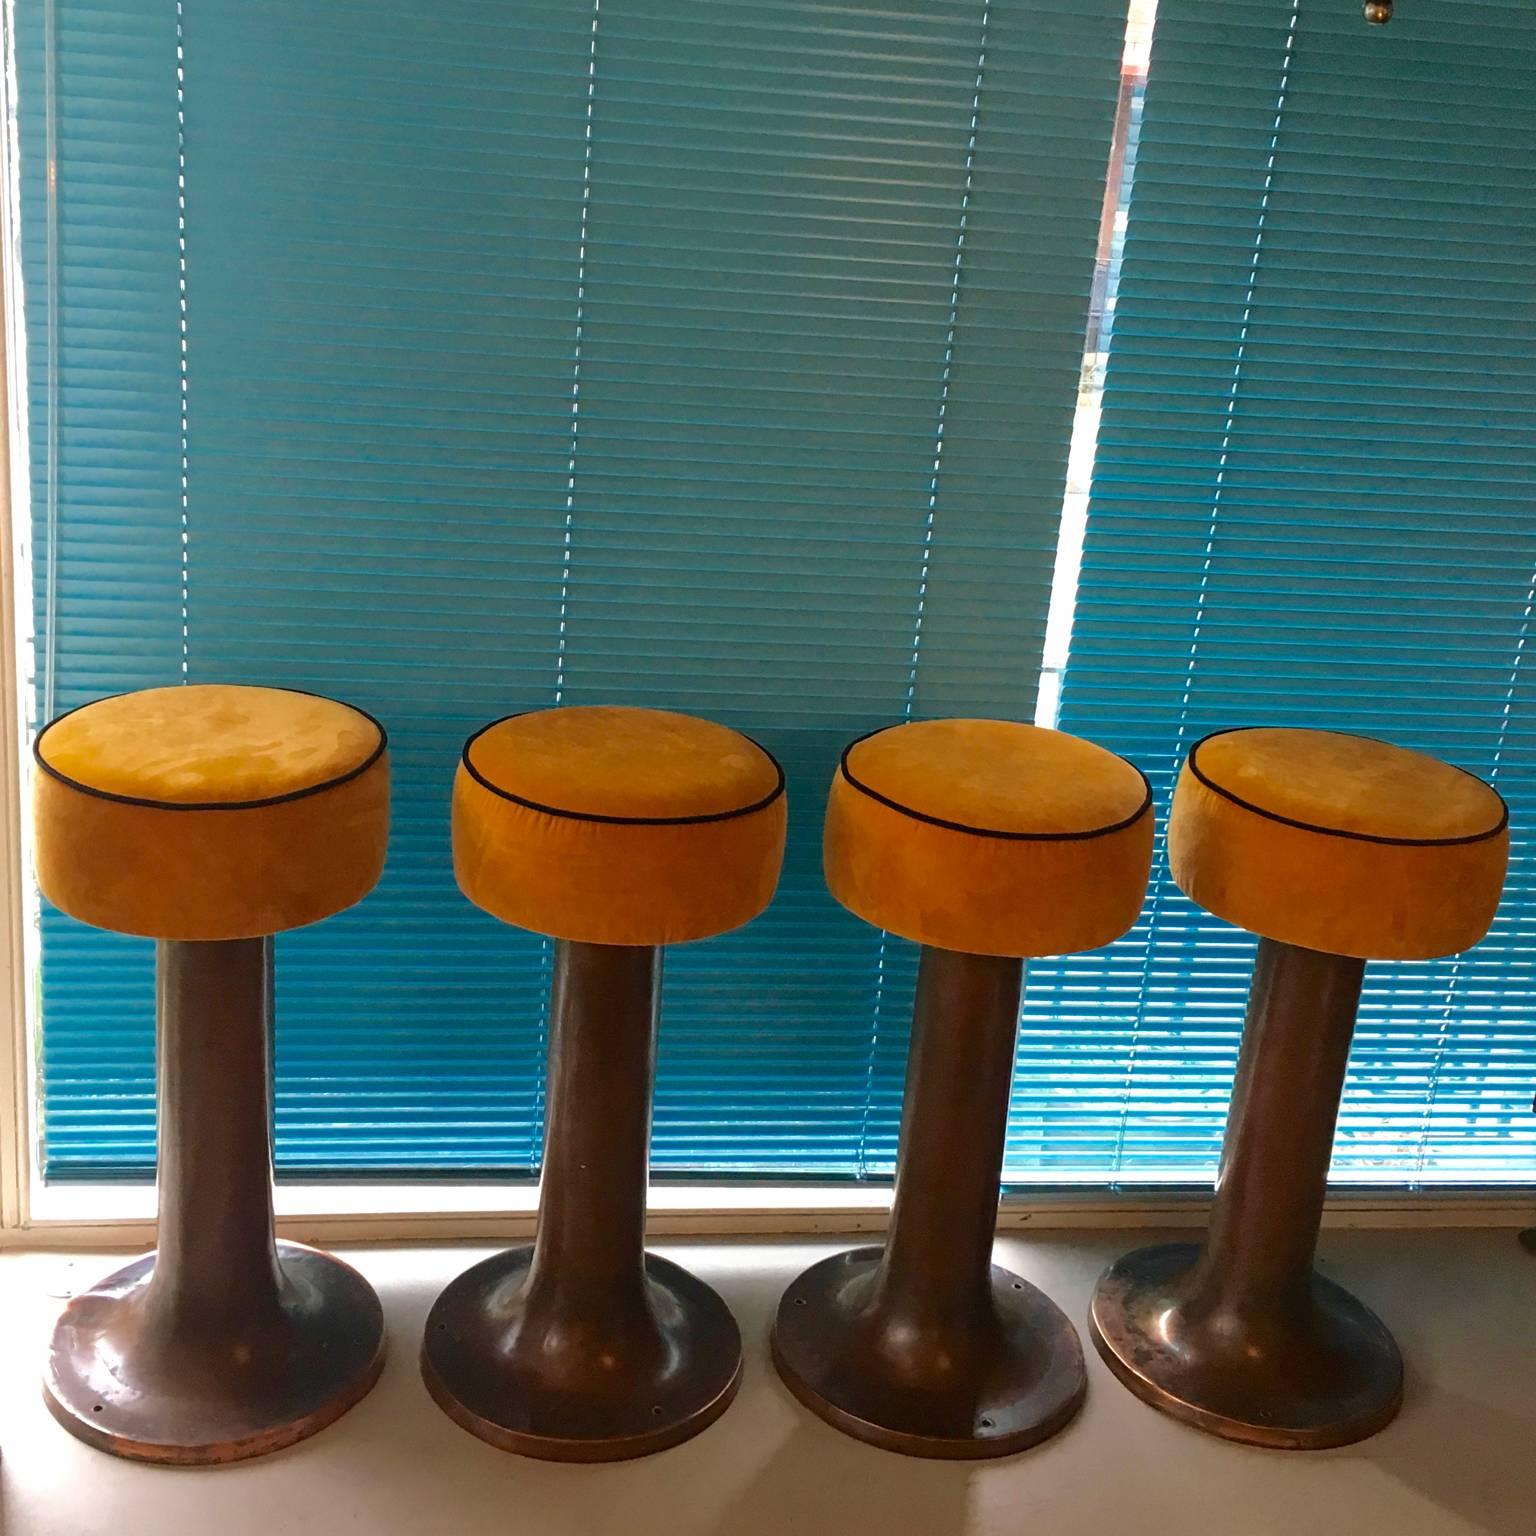 Streamlined Moderne Set of Four Early 20th Century Copper Bar Stools from an Italian Ocean Liner